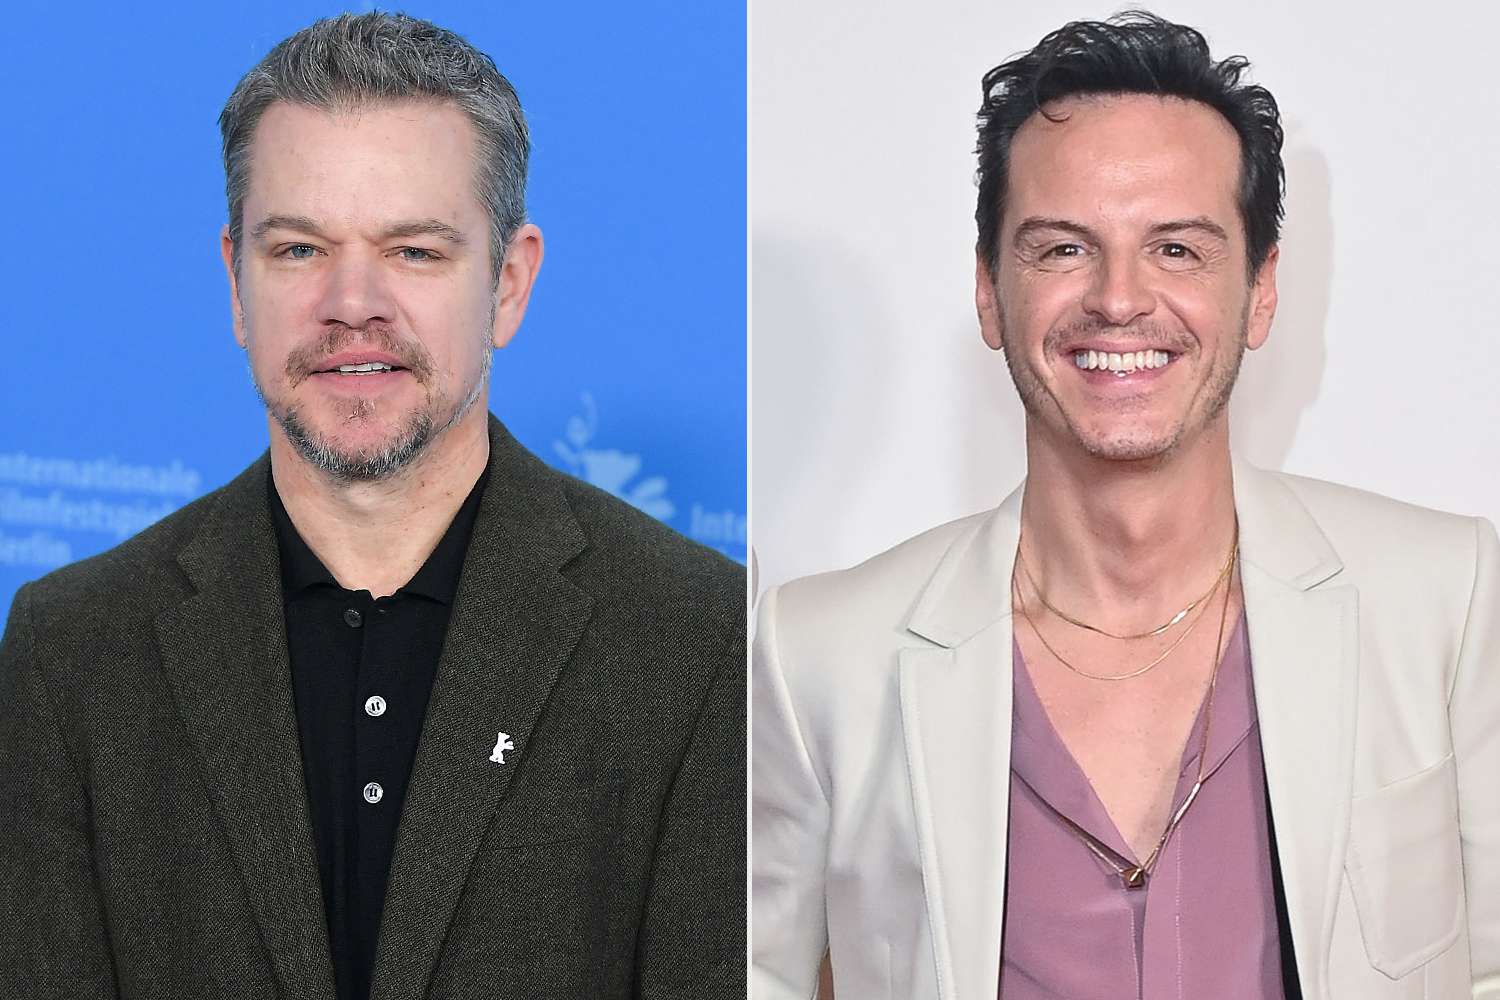 Matt Damon Says He 'Had Trouble' Watching Andrew Scott's Ripley Two Decades After Starring in 'The Talented Mr. Ripley'